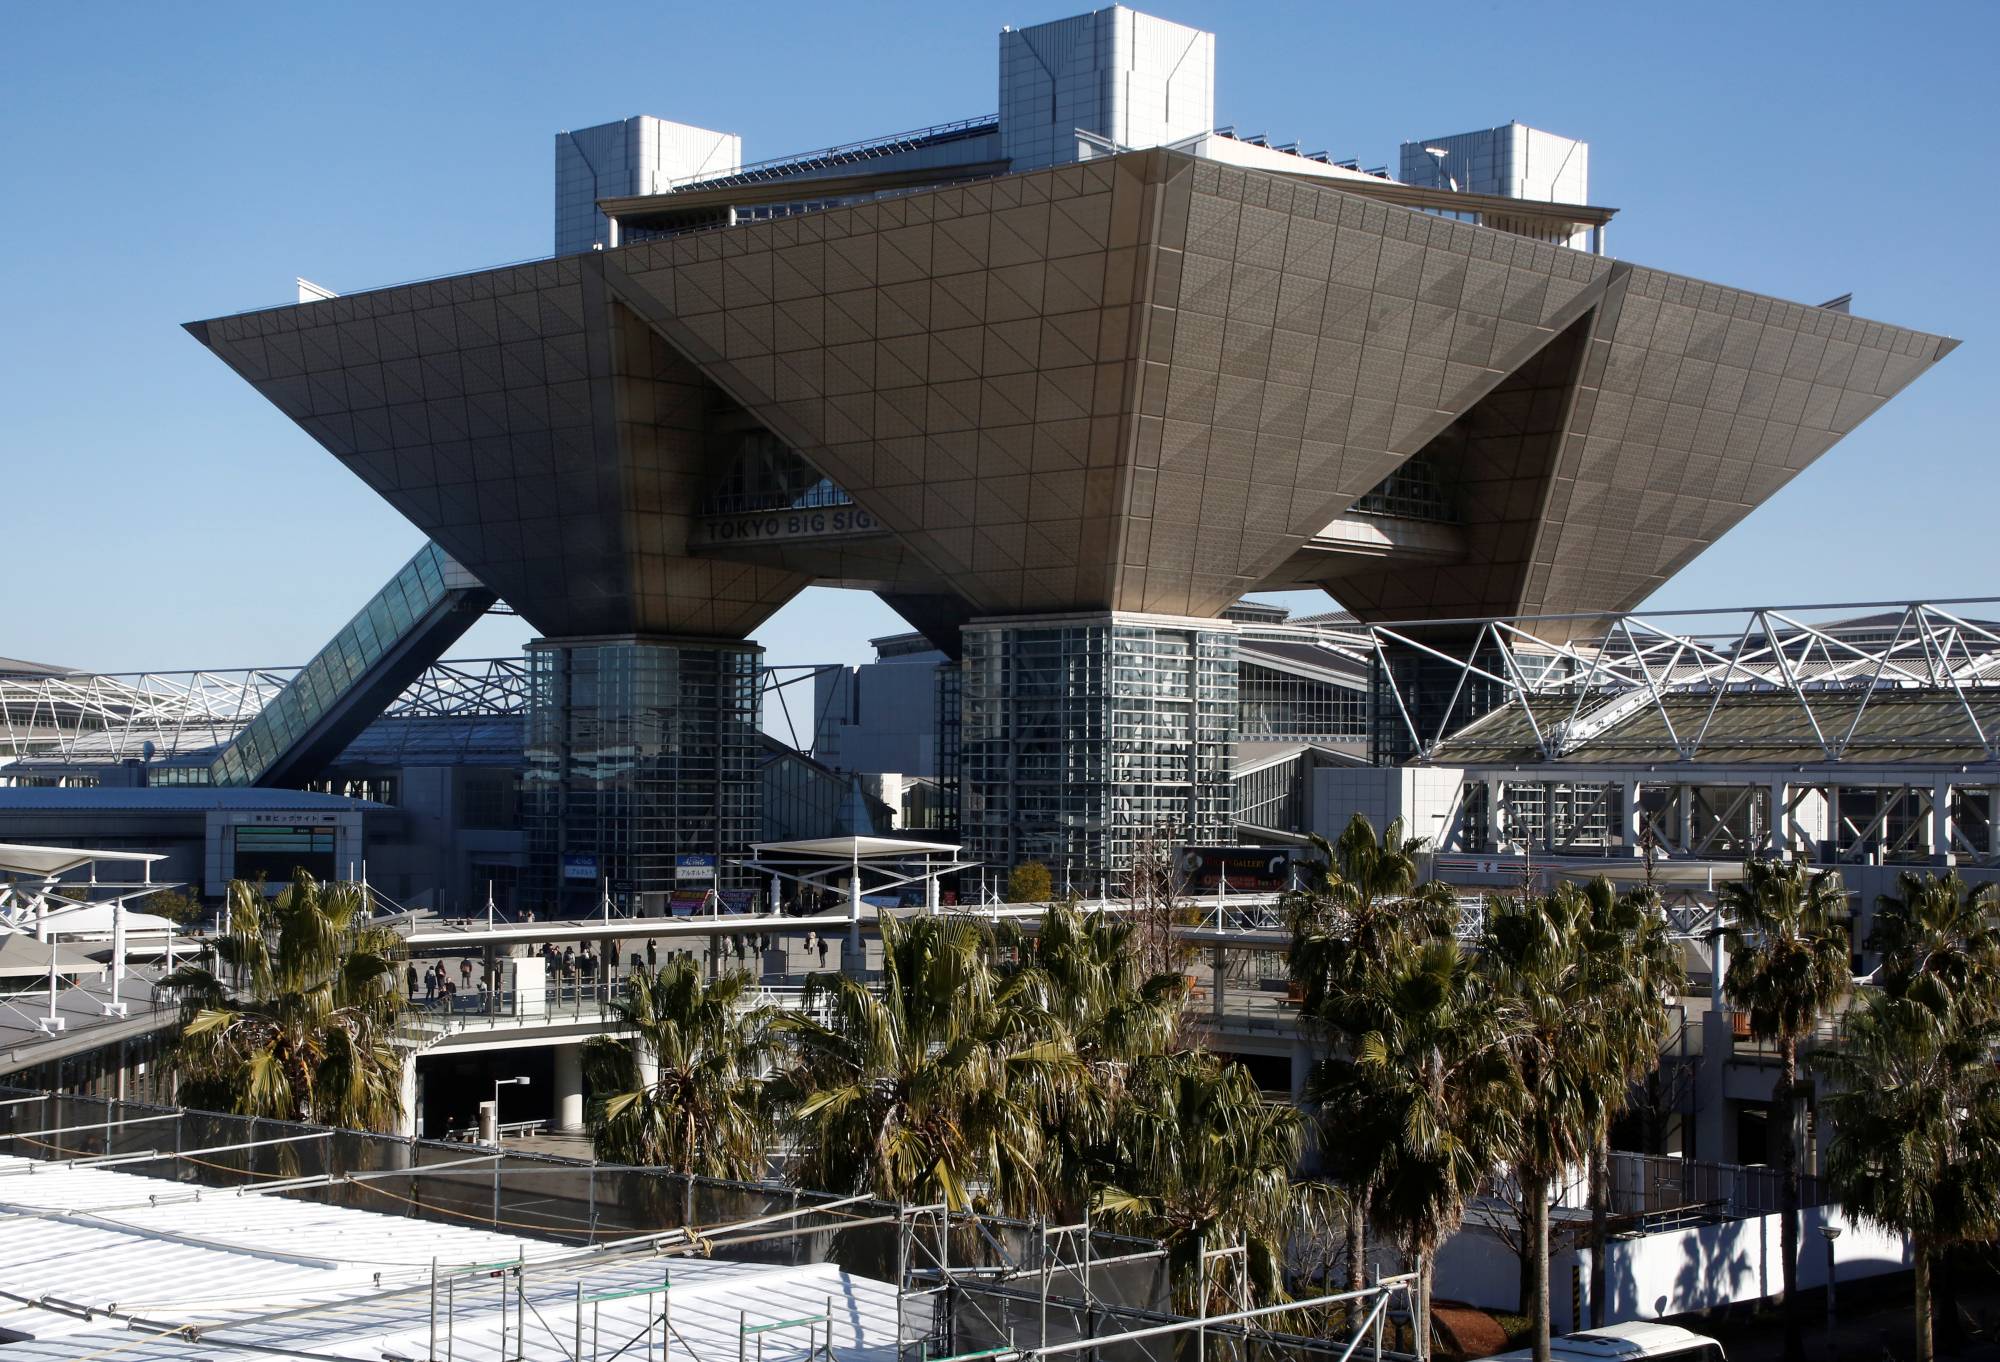 Tokyo Big Sight was supposed to be the main press and international broadcast center for the 2020 Tokyo Olympics. | REUTERS